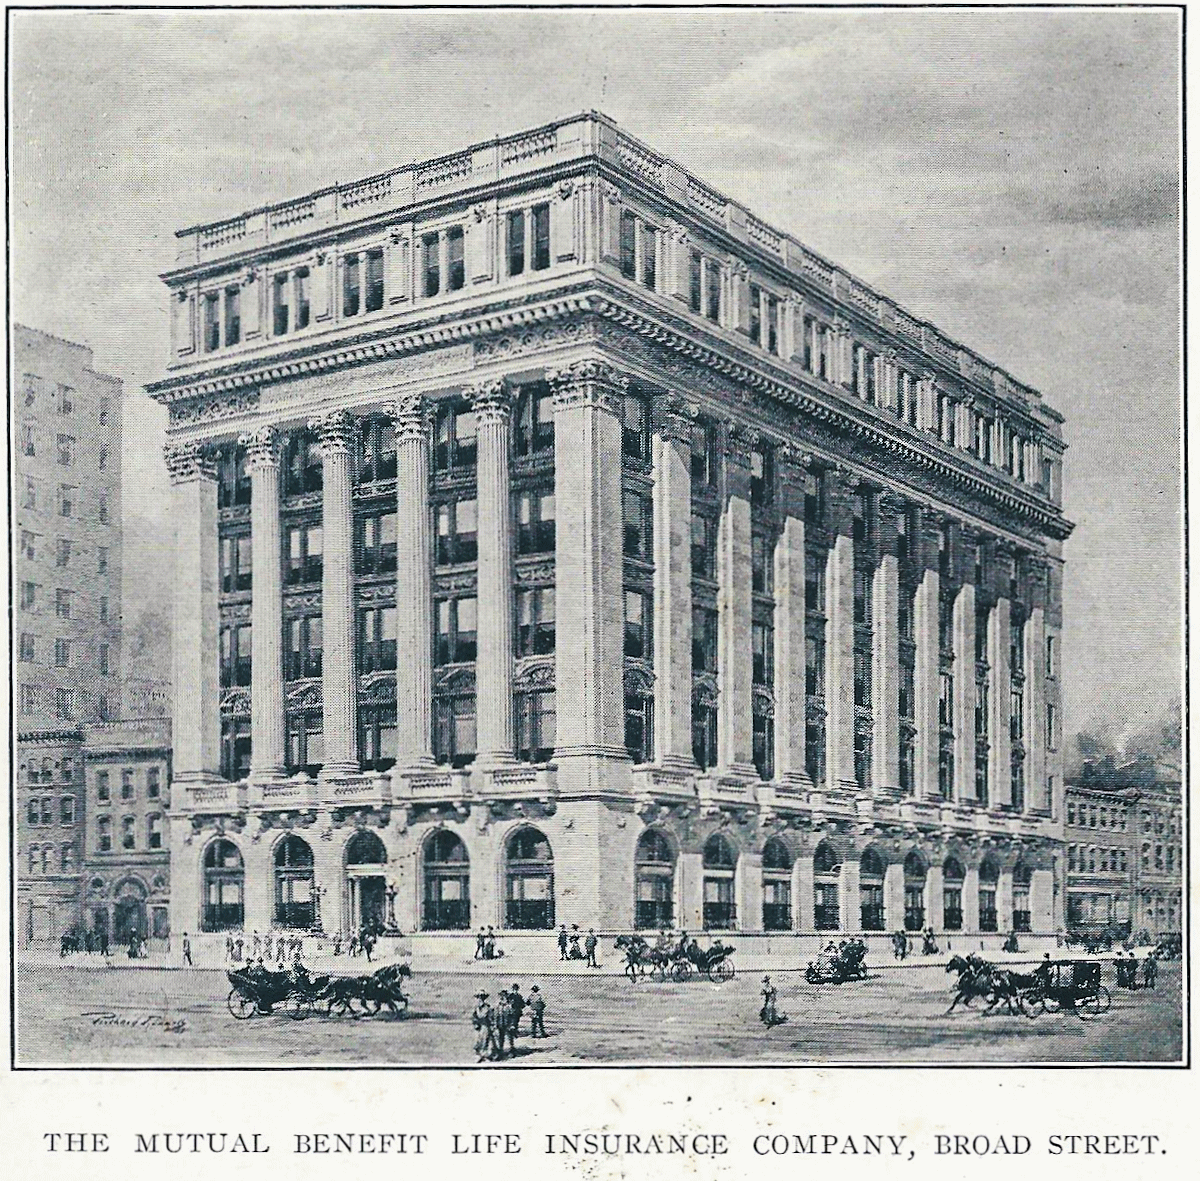 1912
From: "Newark, the City of Industry" Published by the Newark Board of Trade 1912
